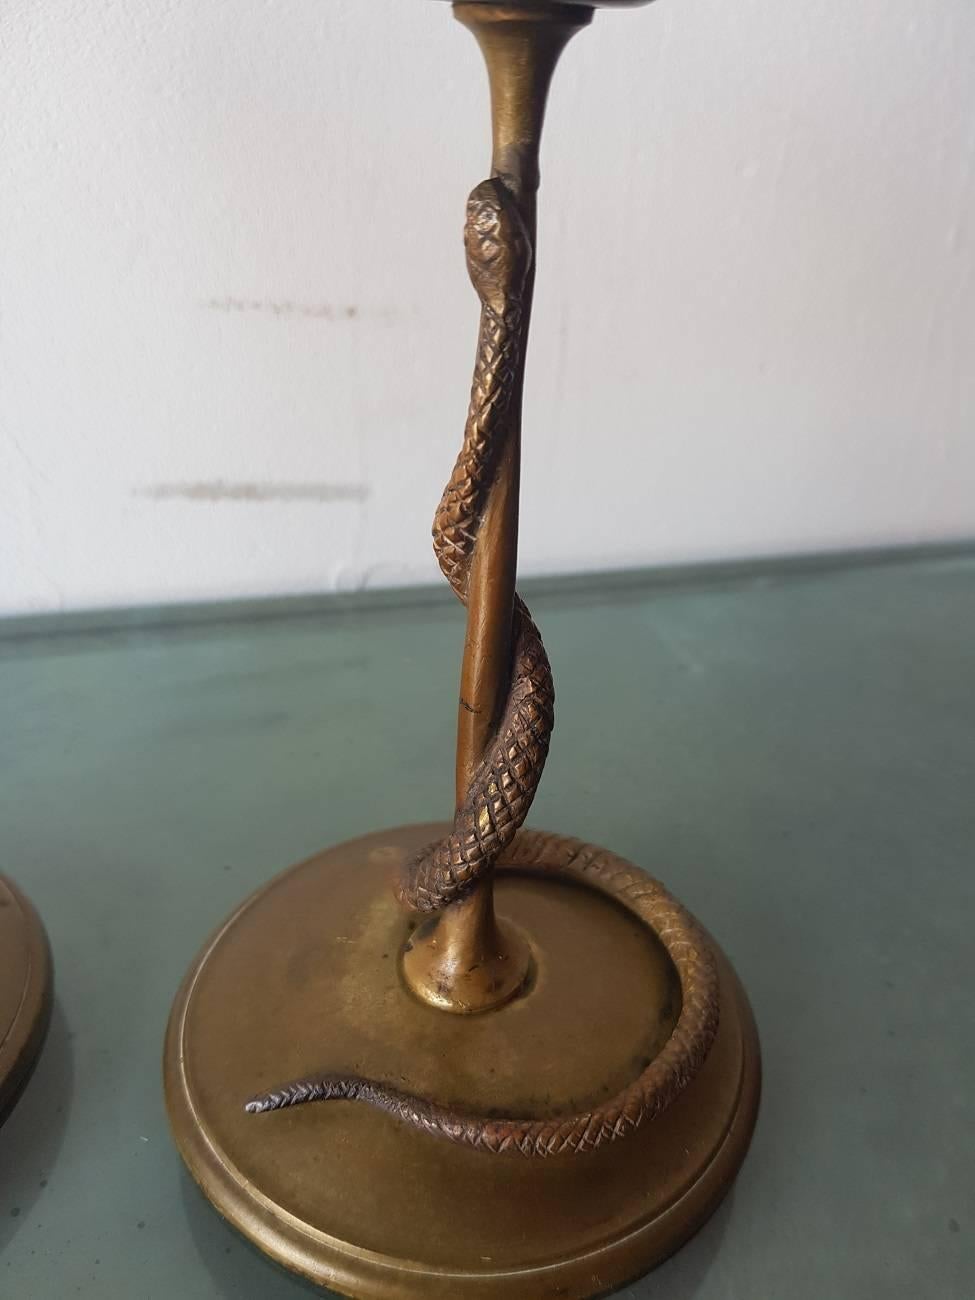 Set of two lovely Minimalist design French bronze candlesticks decorated with a snake curling around the stem 19th century.

The measurements are,
Depth 9 cm/ 3.5 inch.
Width 9 cm/ 3.5 inch.
Height 18.5 cm/ 7.2 inch.